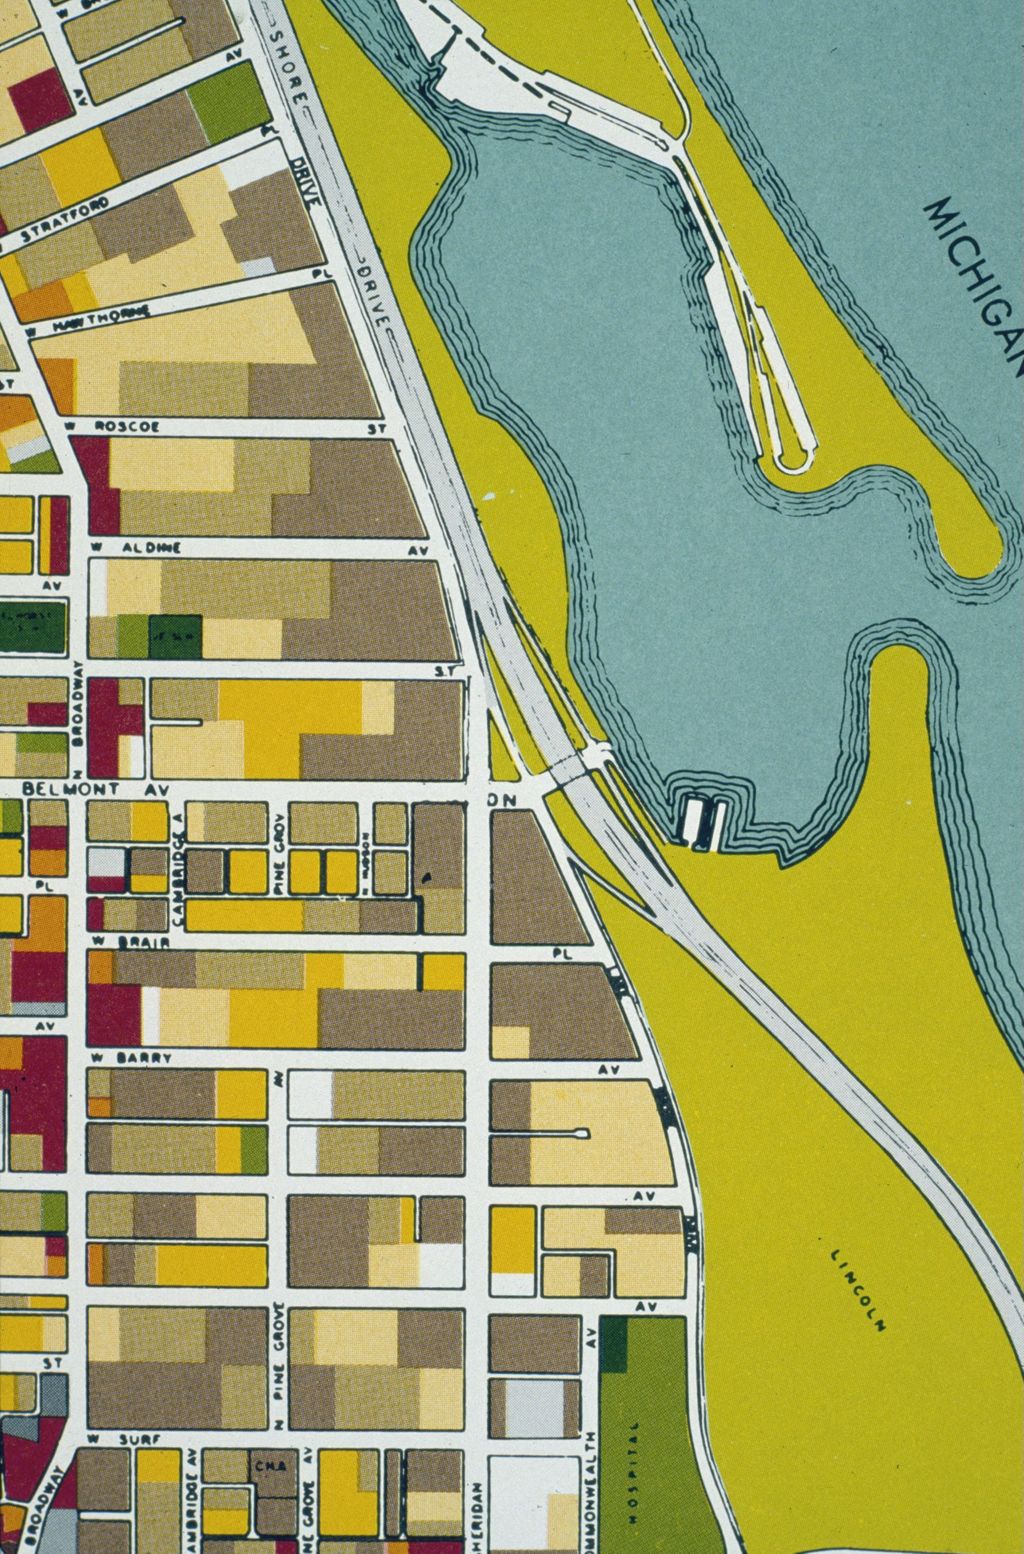 Land use along the lakefront near Lincoln Park